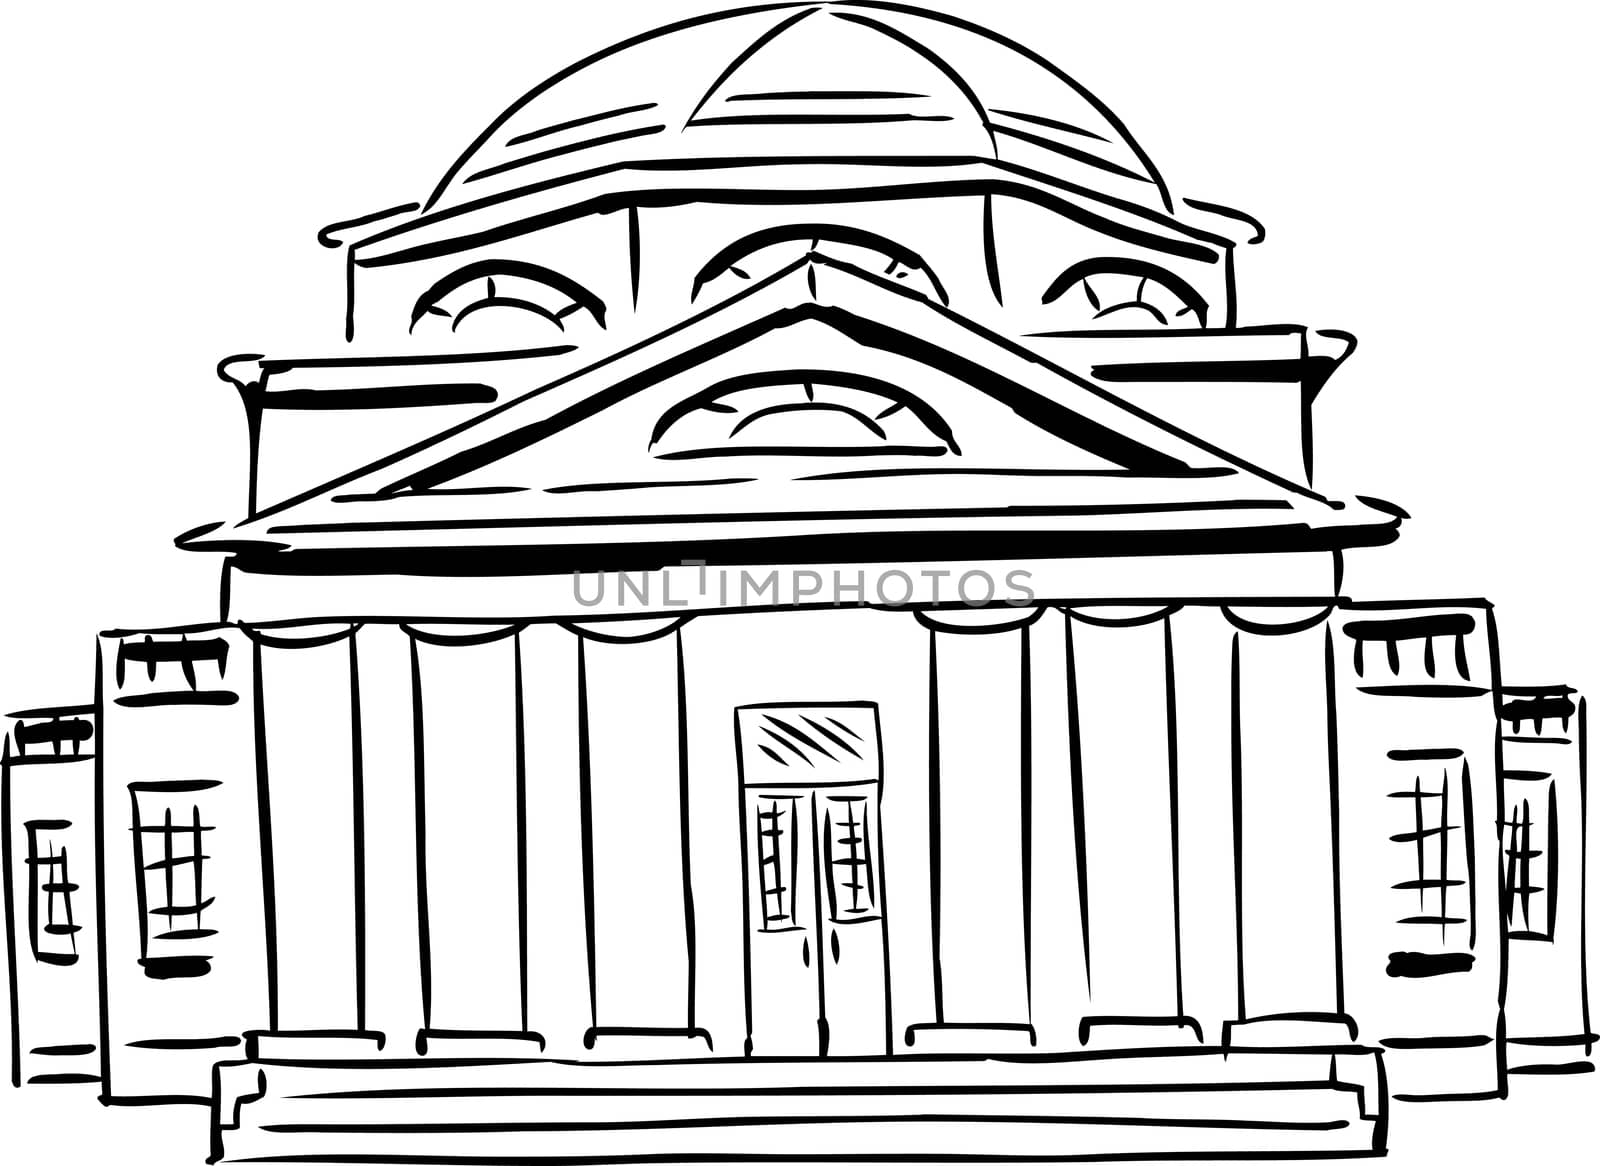 Outlined Church with Domed Roof by TheBlackRhino